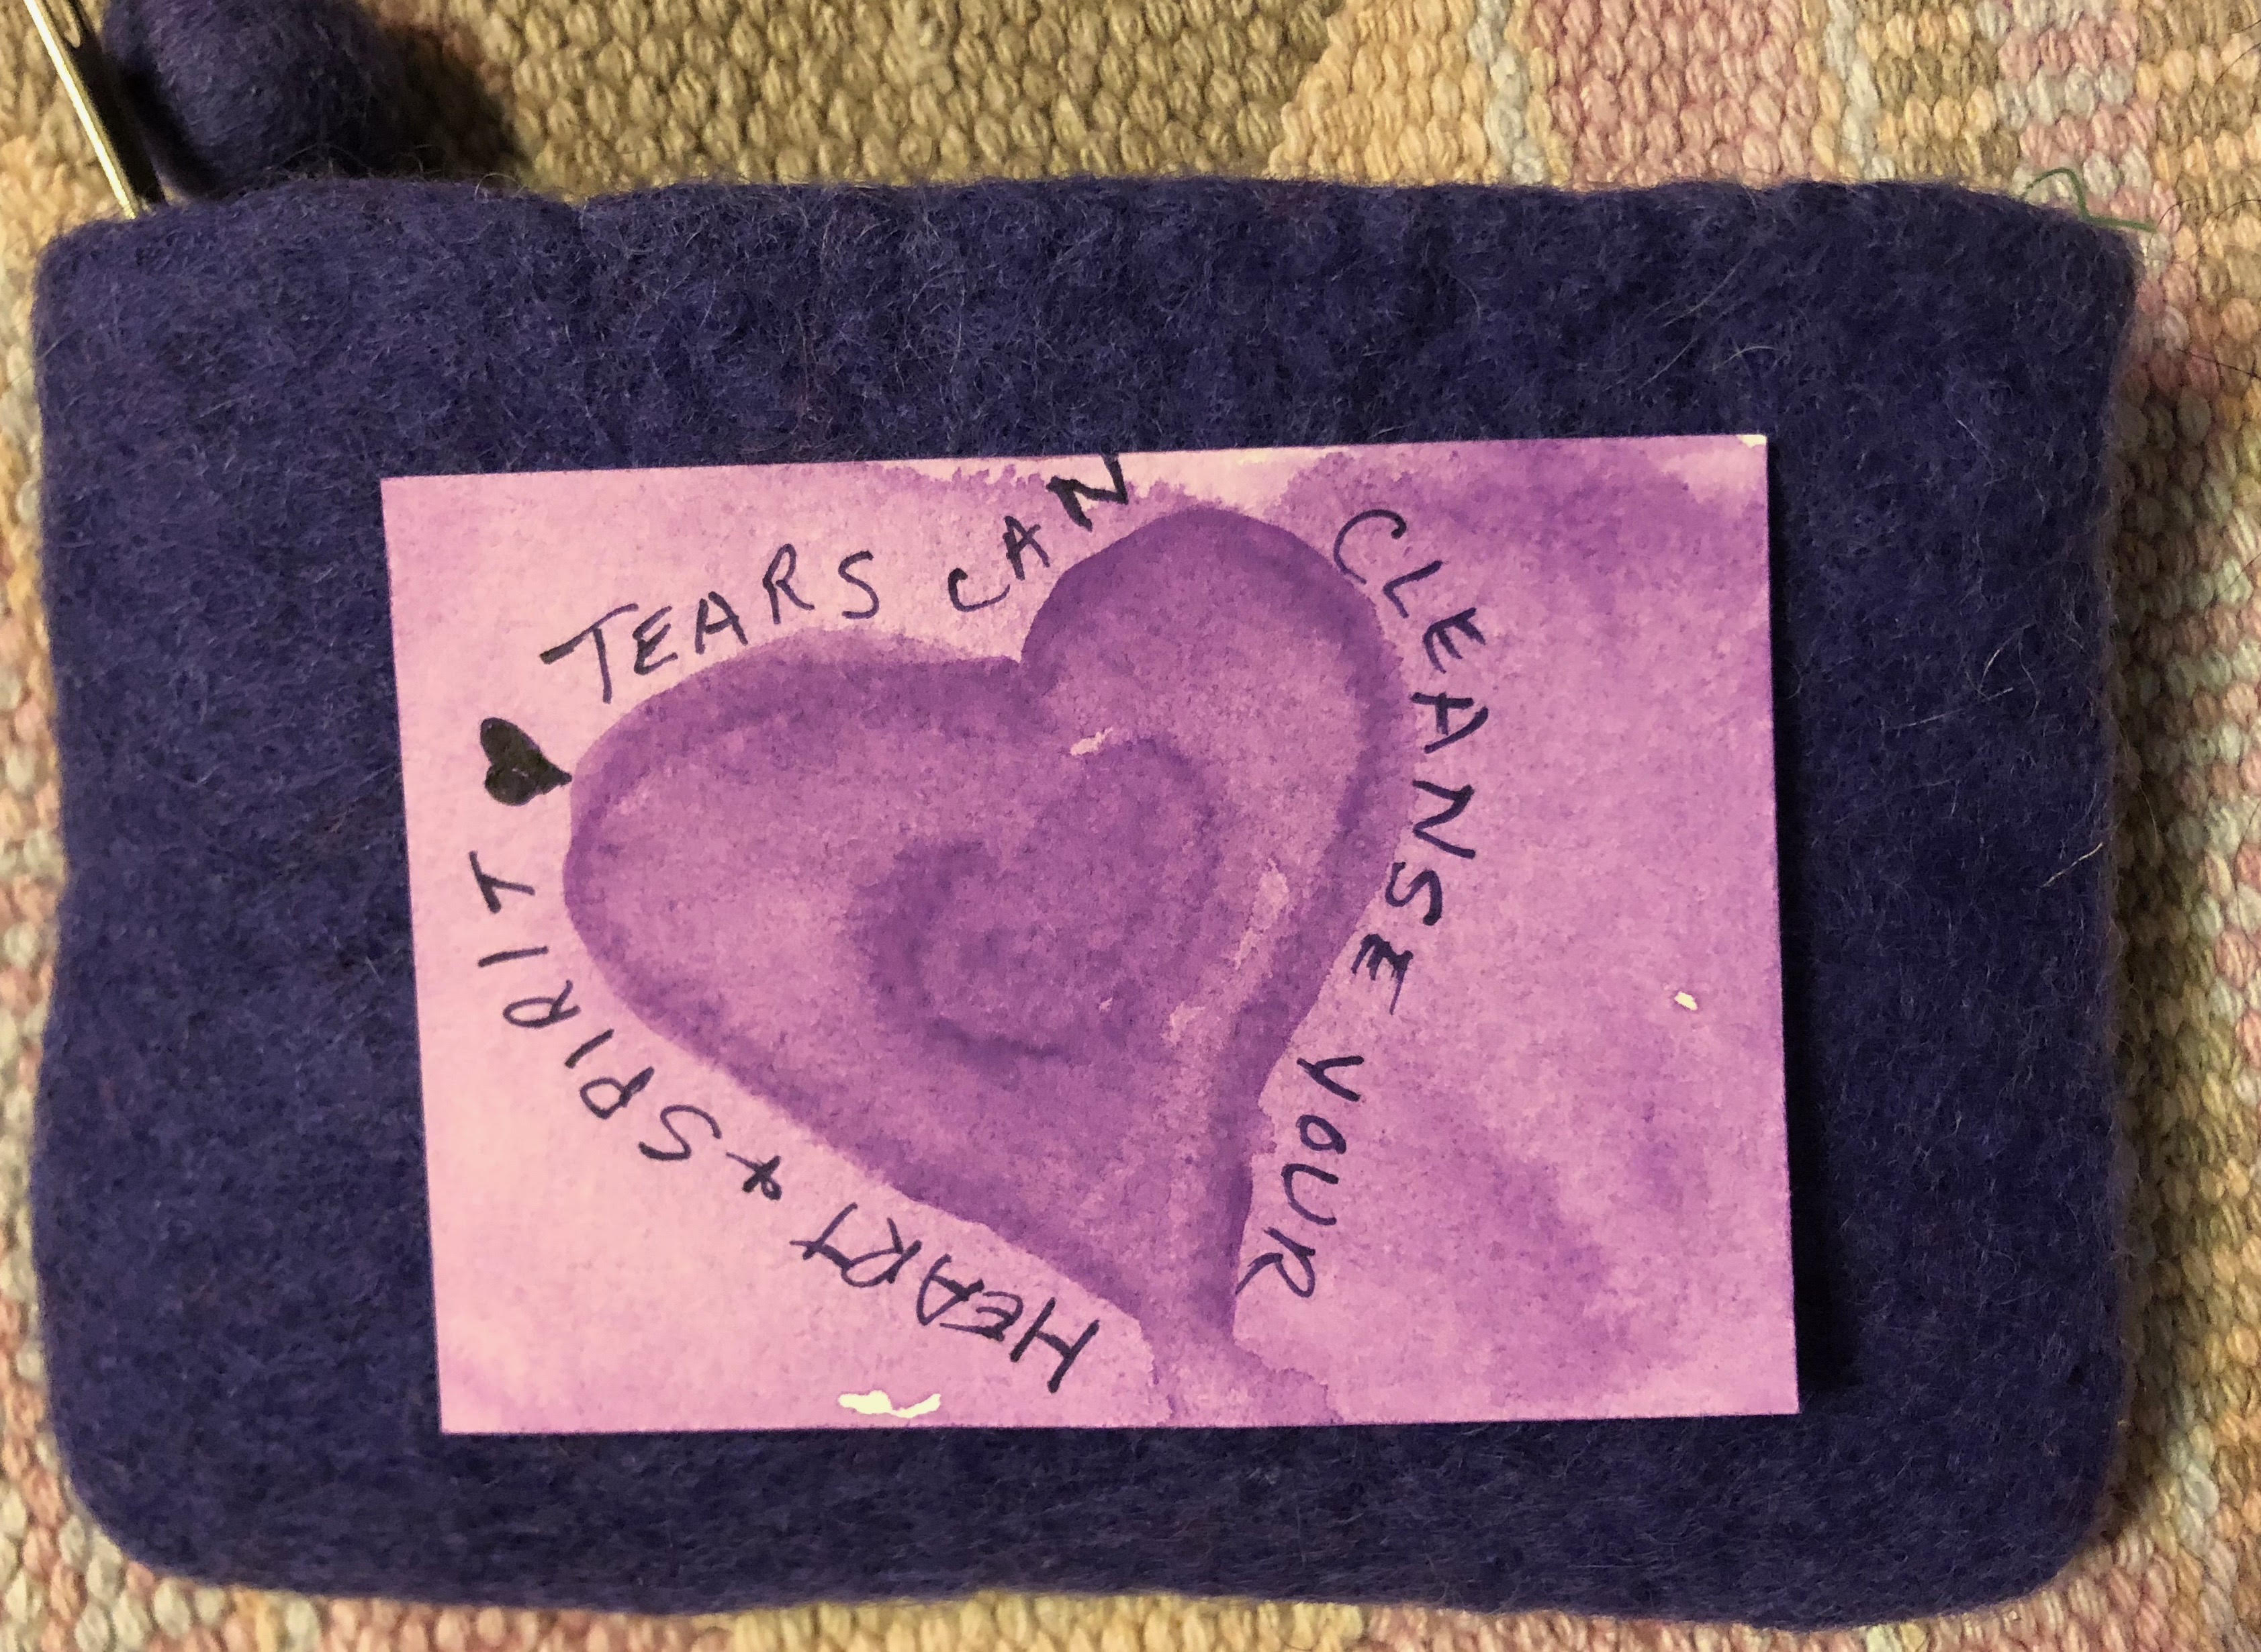 Day 55 - Tears Can Cleanse your heart and spirit